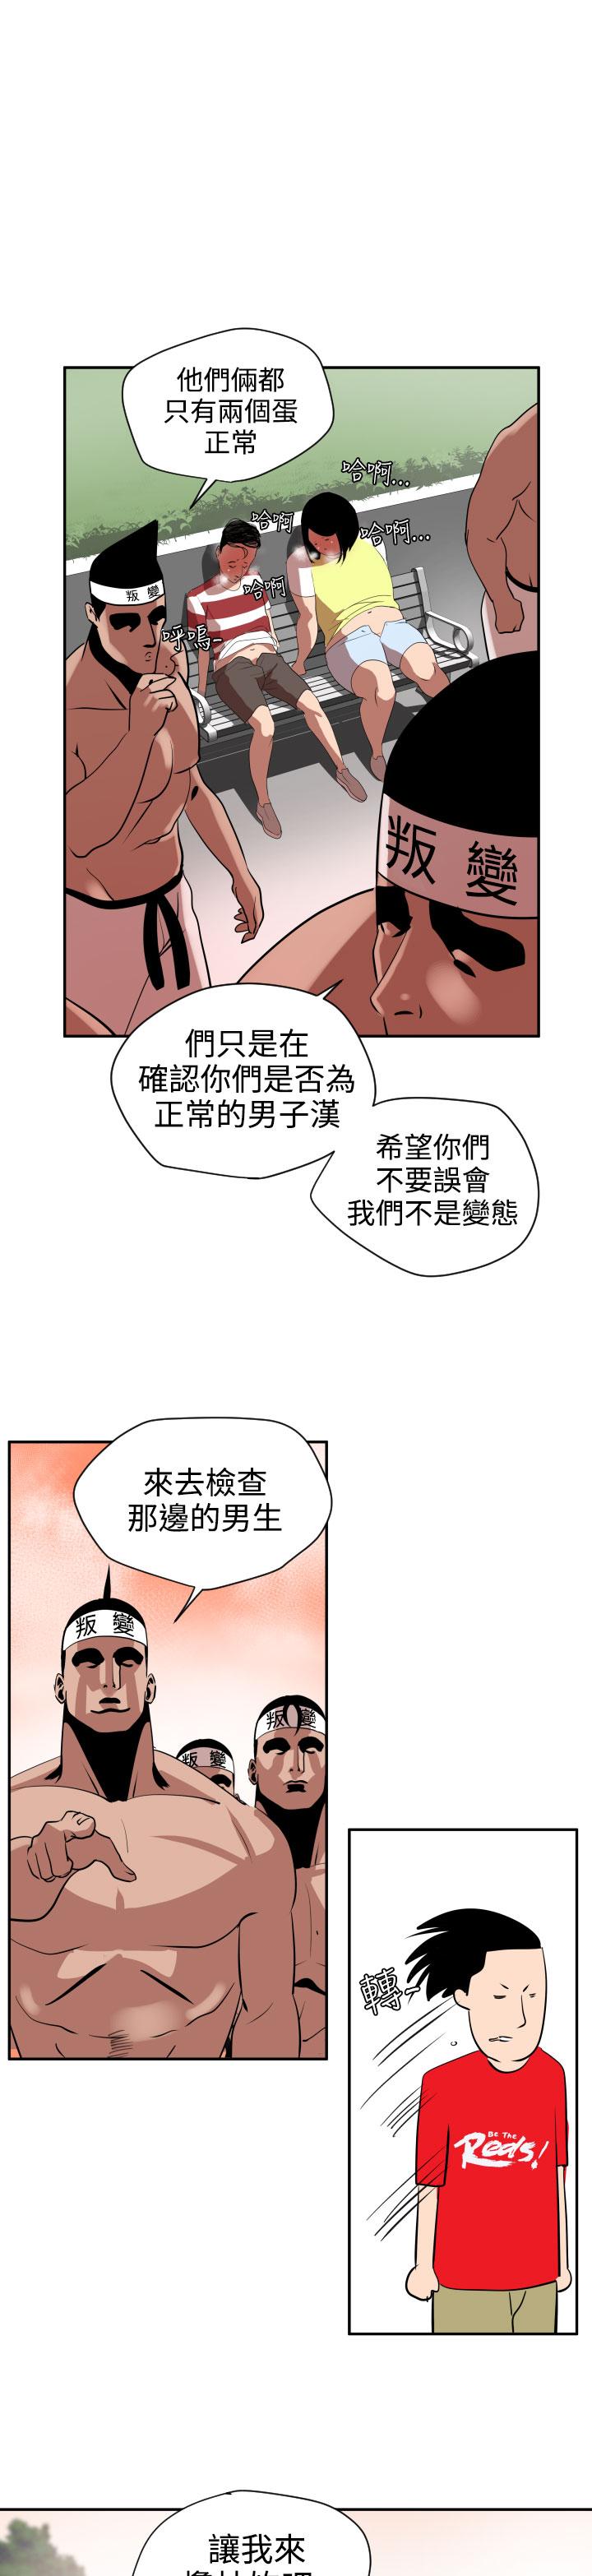 Desire King (慾求王) Ch.1-12 (chinese) 276